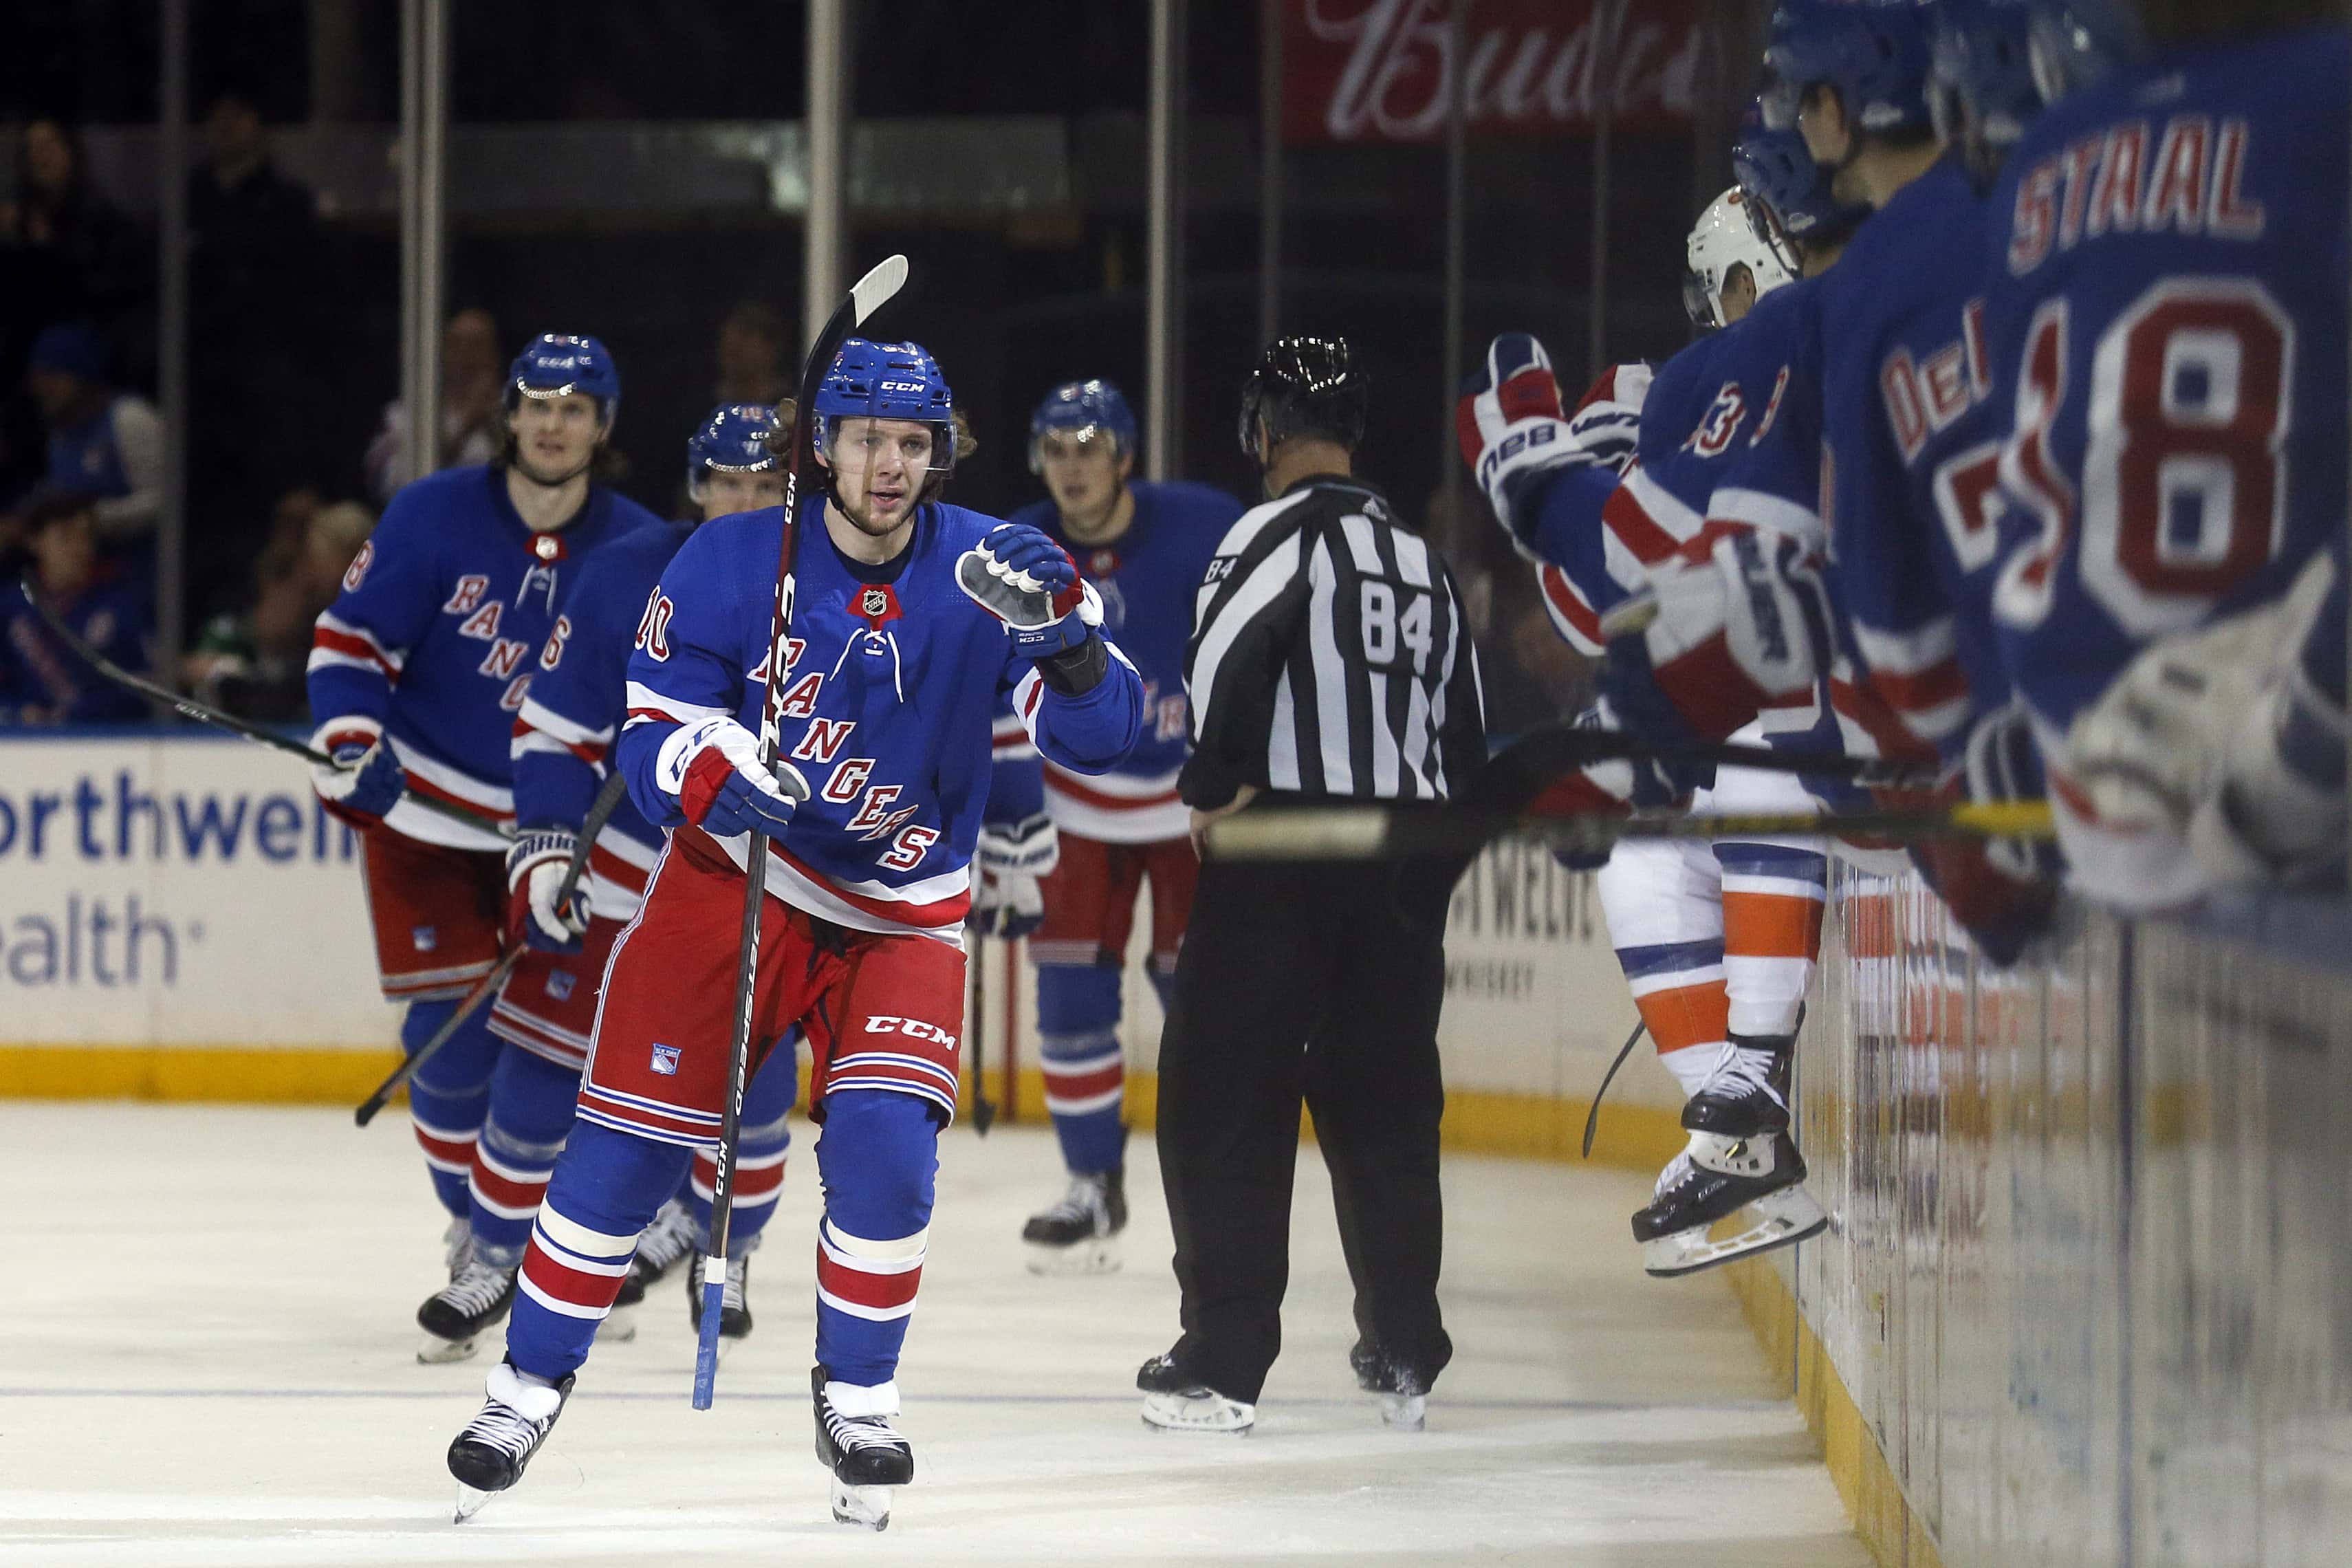 Jan 13, 2020; New York, New York, USA; New York Rangers left wing Artemi Panarin (10) celebrates with teammates after scoring a goal during the third period against the New York Islanders at Madison Square Garden. Mandatory Credit: Adam Hunger-USA TODAY Sports